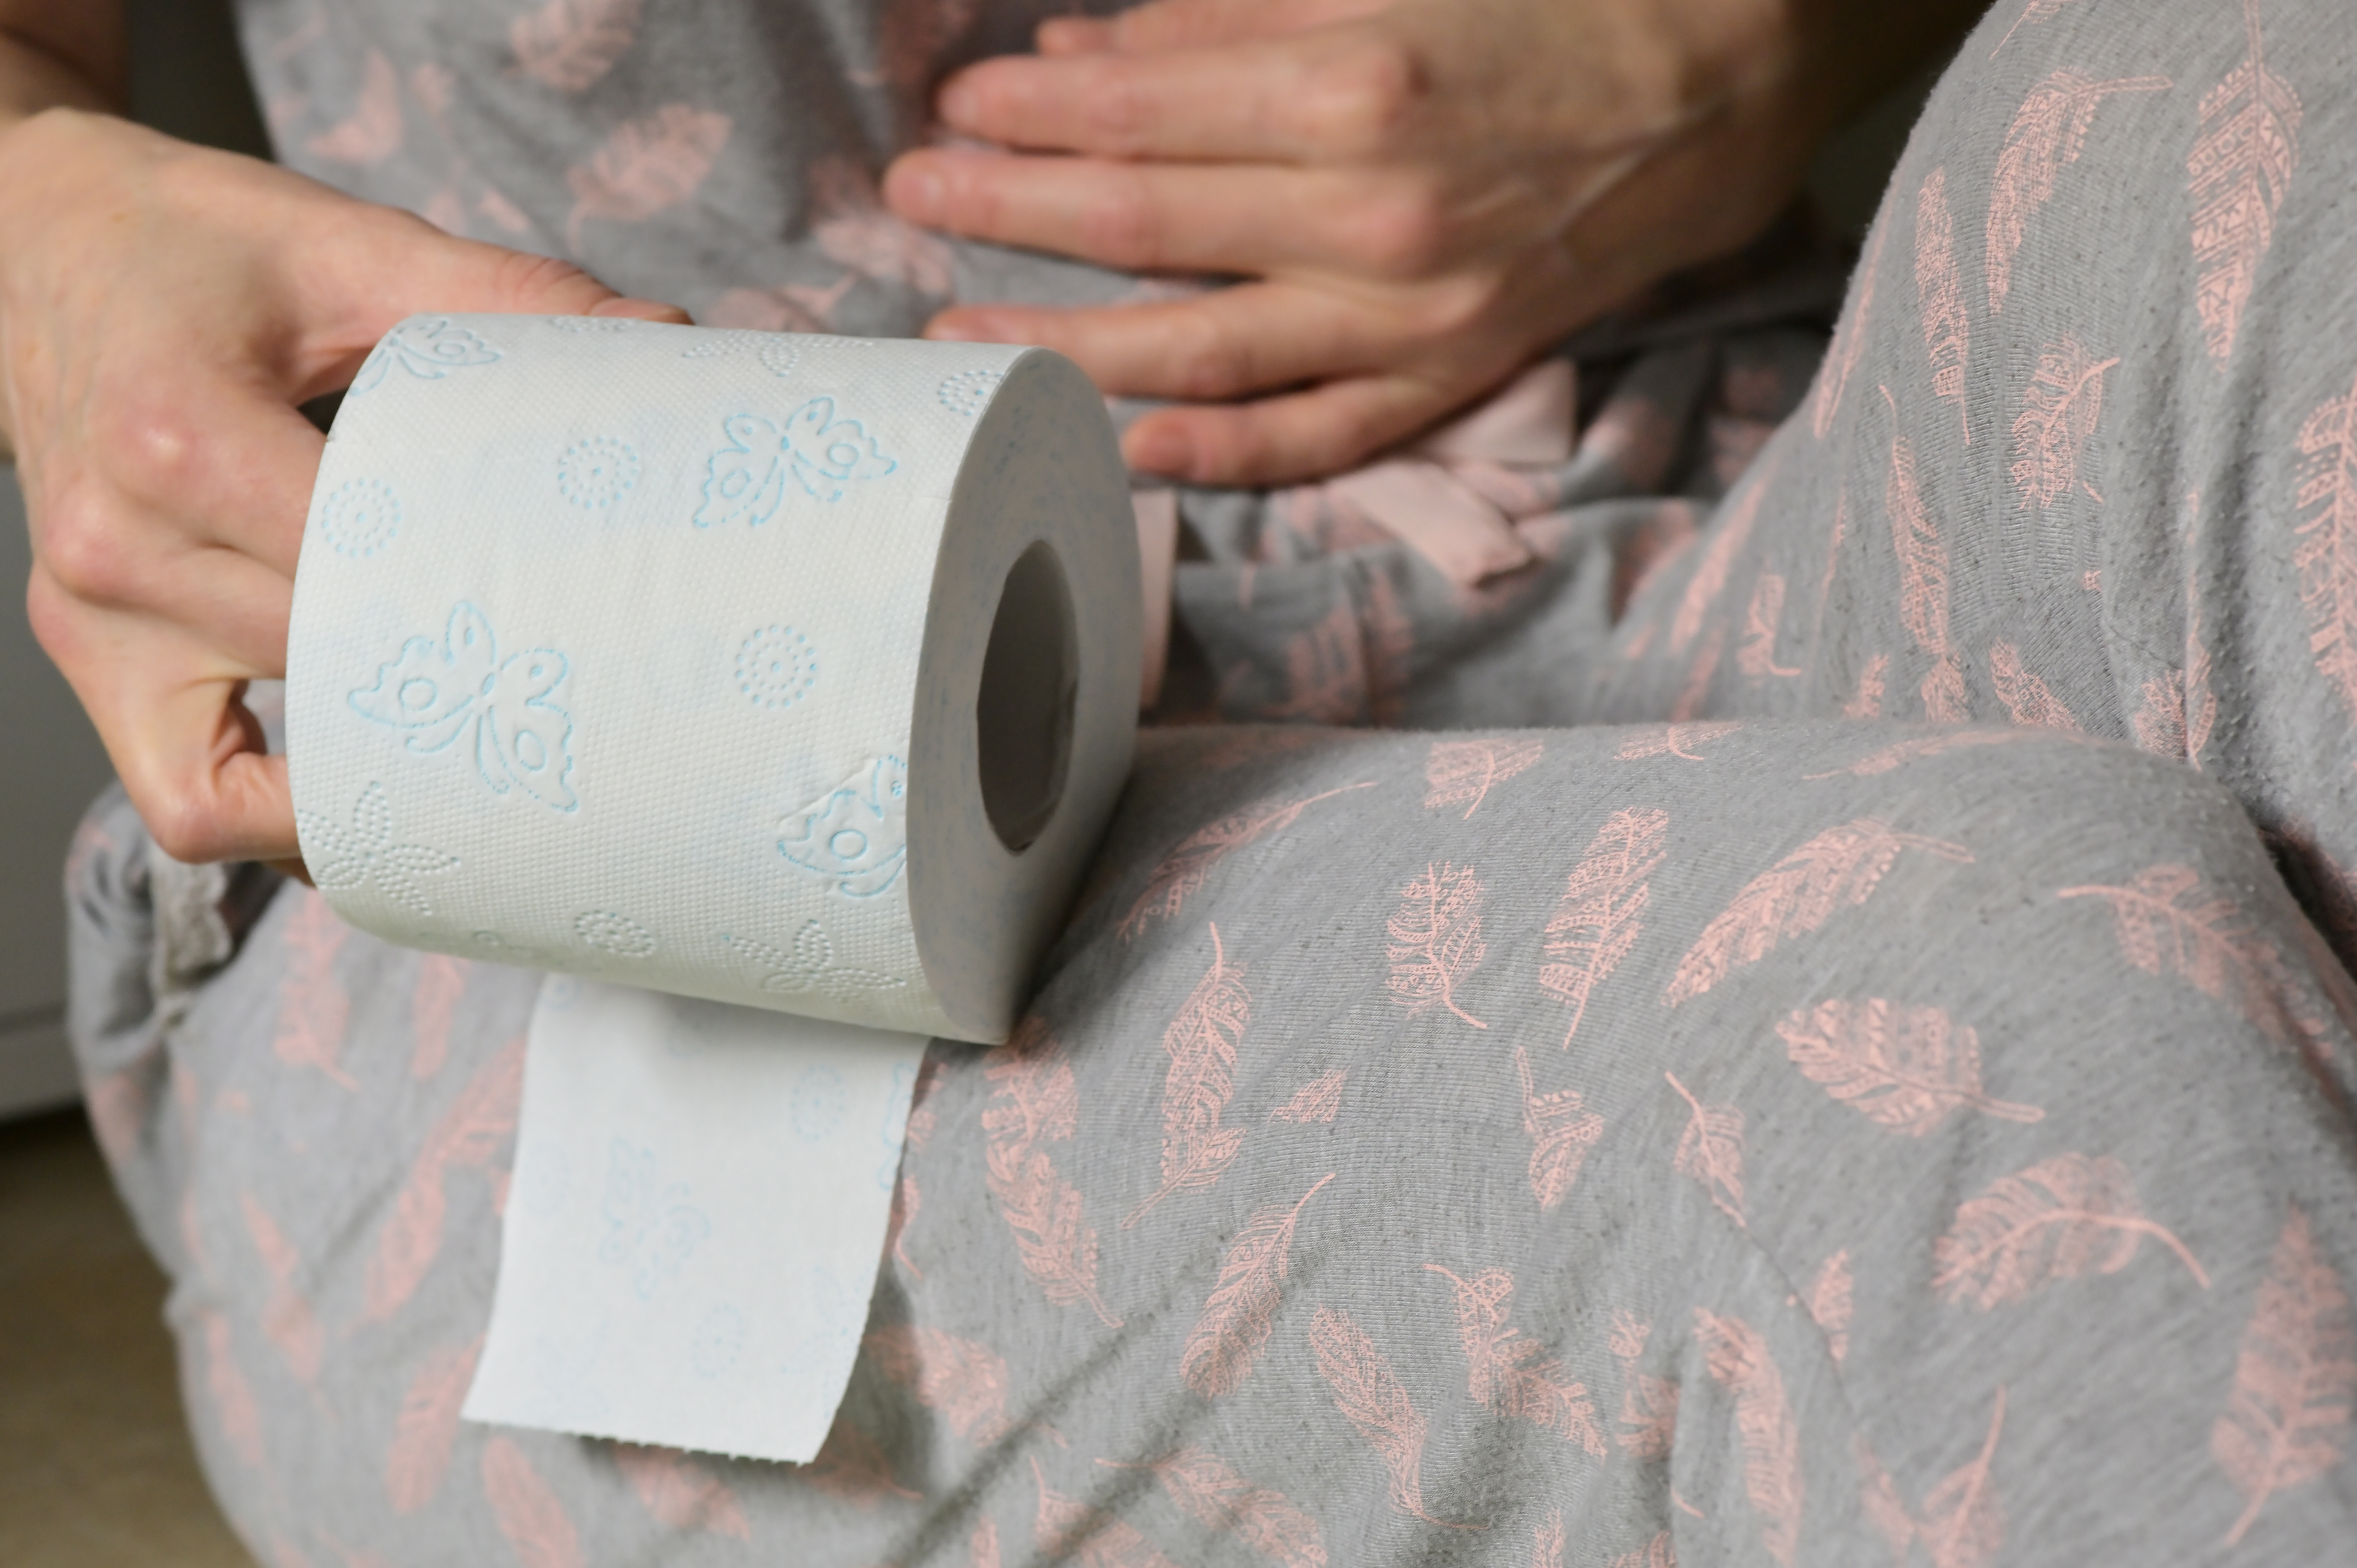 A person holding their stomach and holding a roll of toilet paper